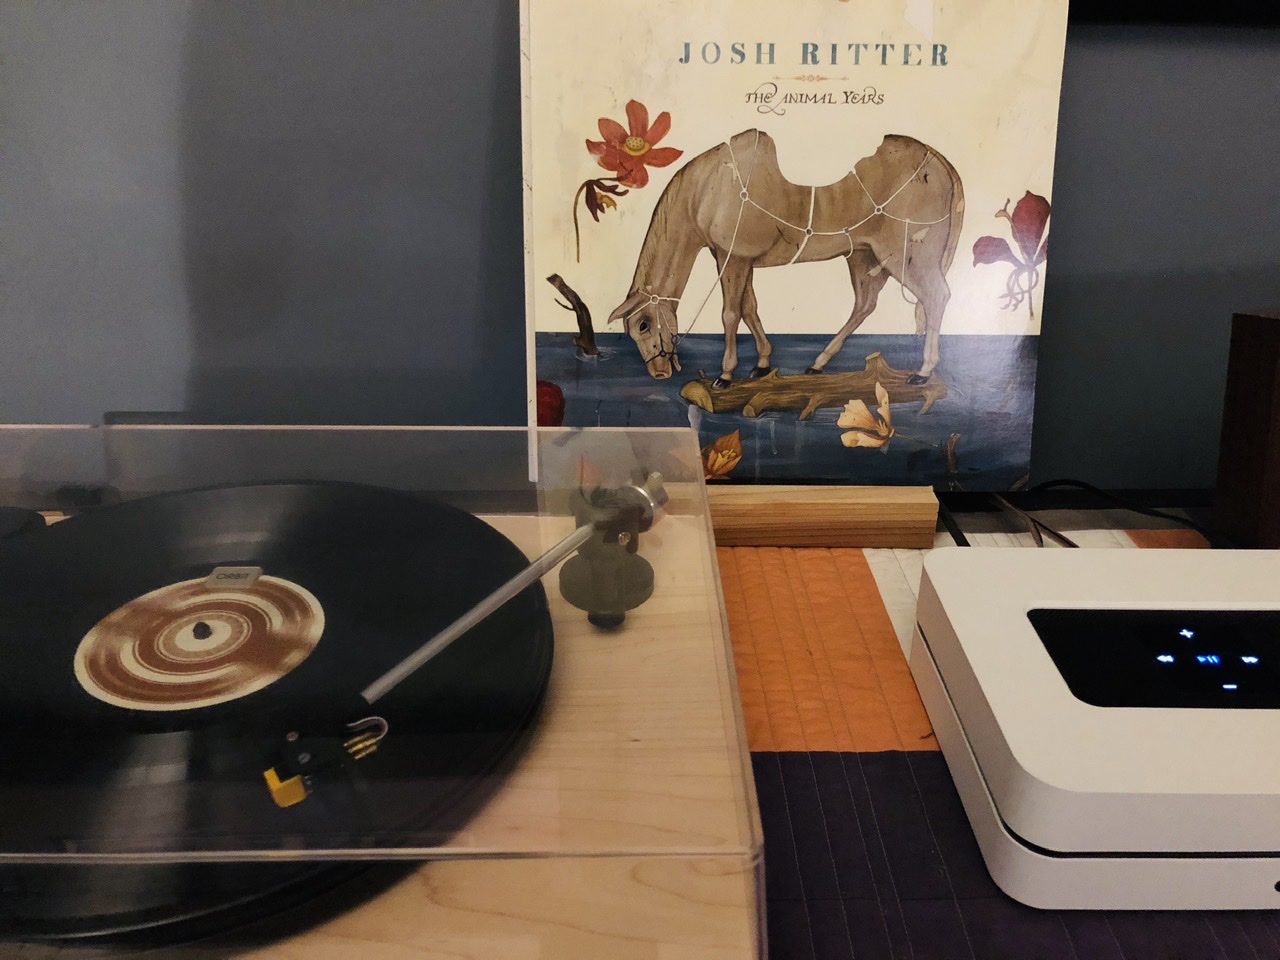 Josh Rotter’s The Animal  Years album cover beside a turntable  